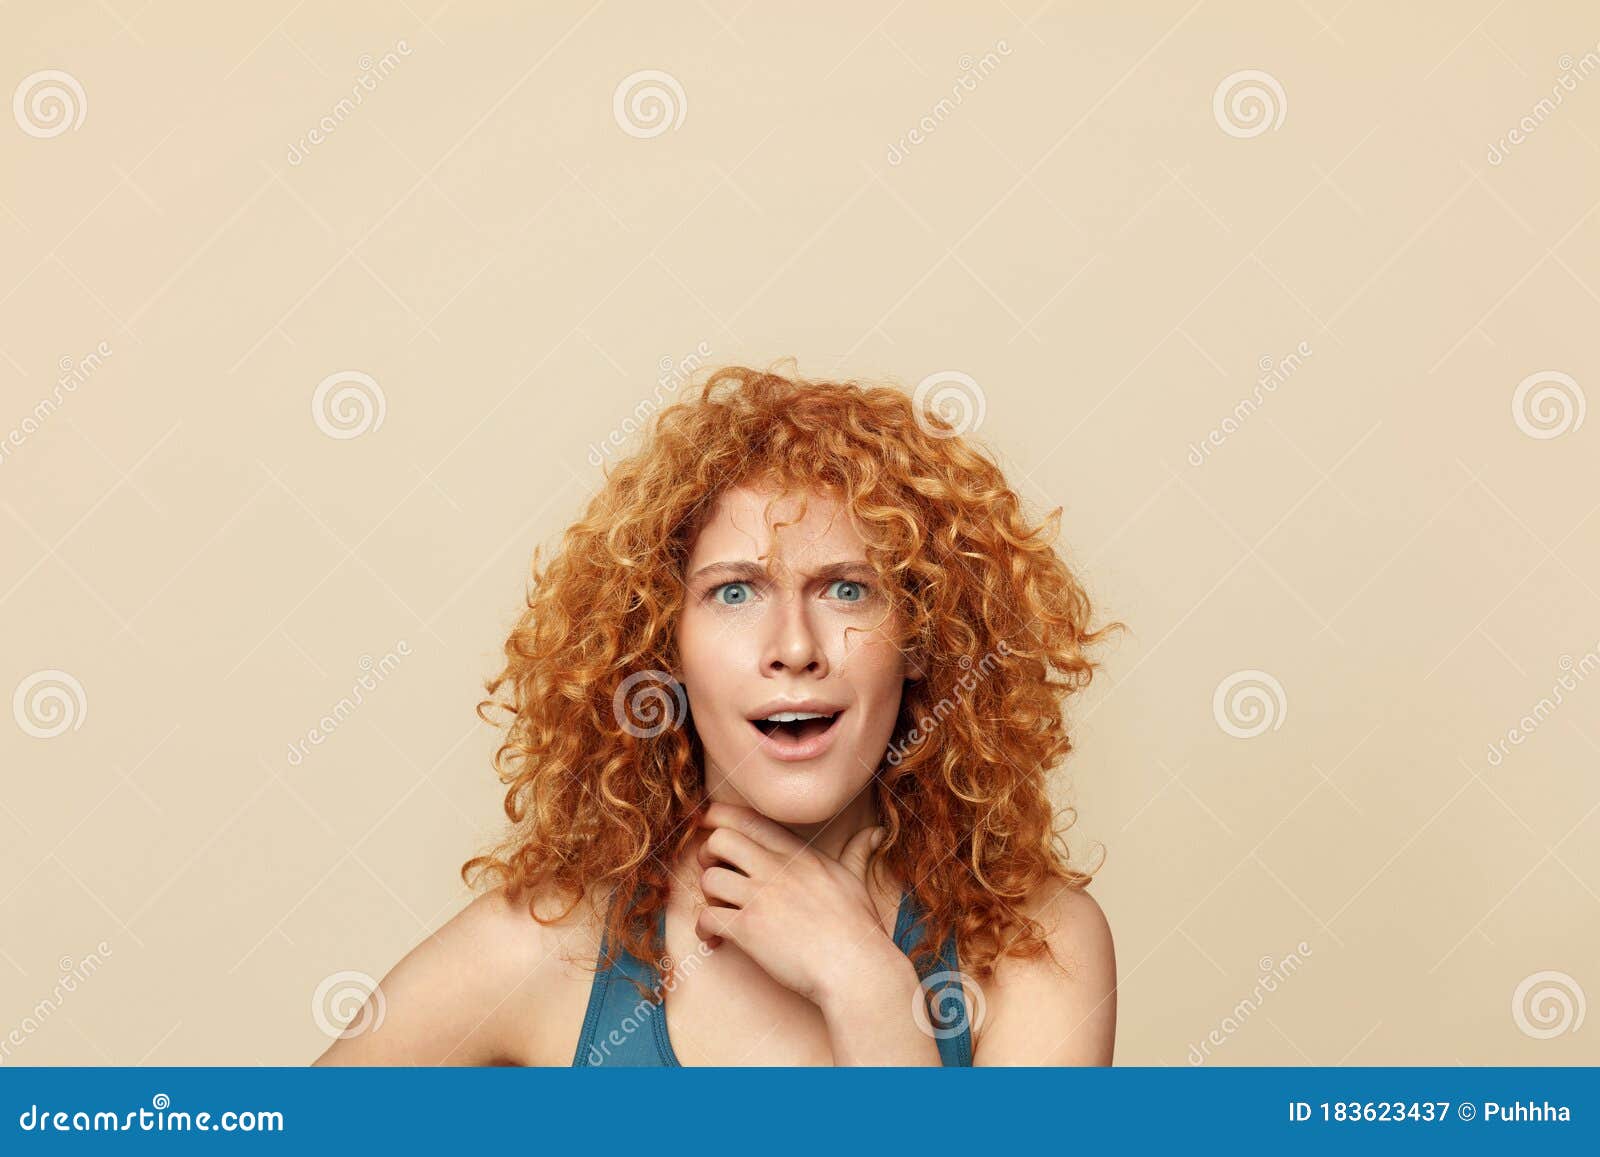 Redhead Woman Surprised Girl Close Up Portrait Blue Eyed Female With Curly Red Hair Touching